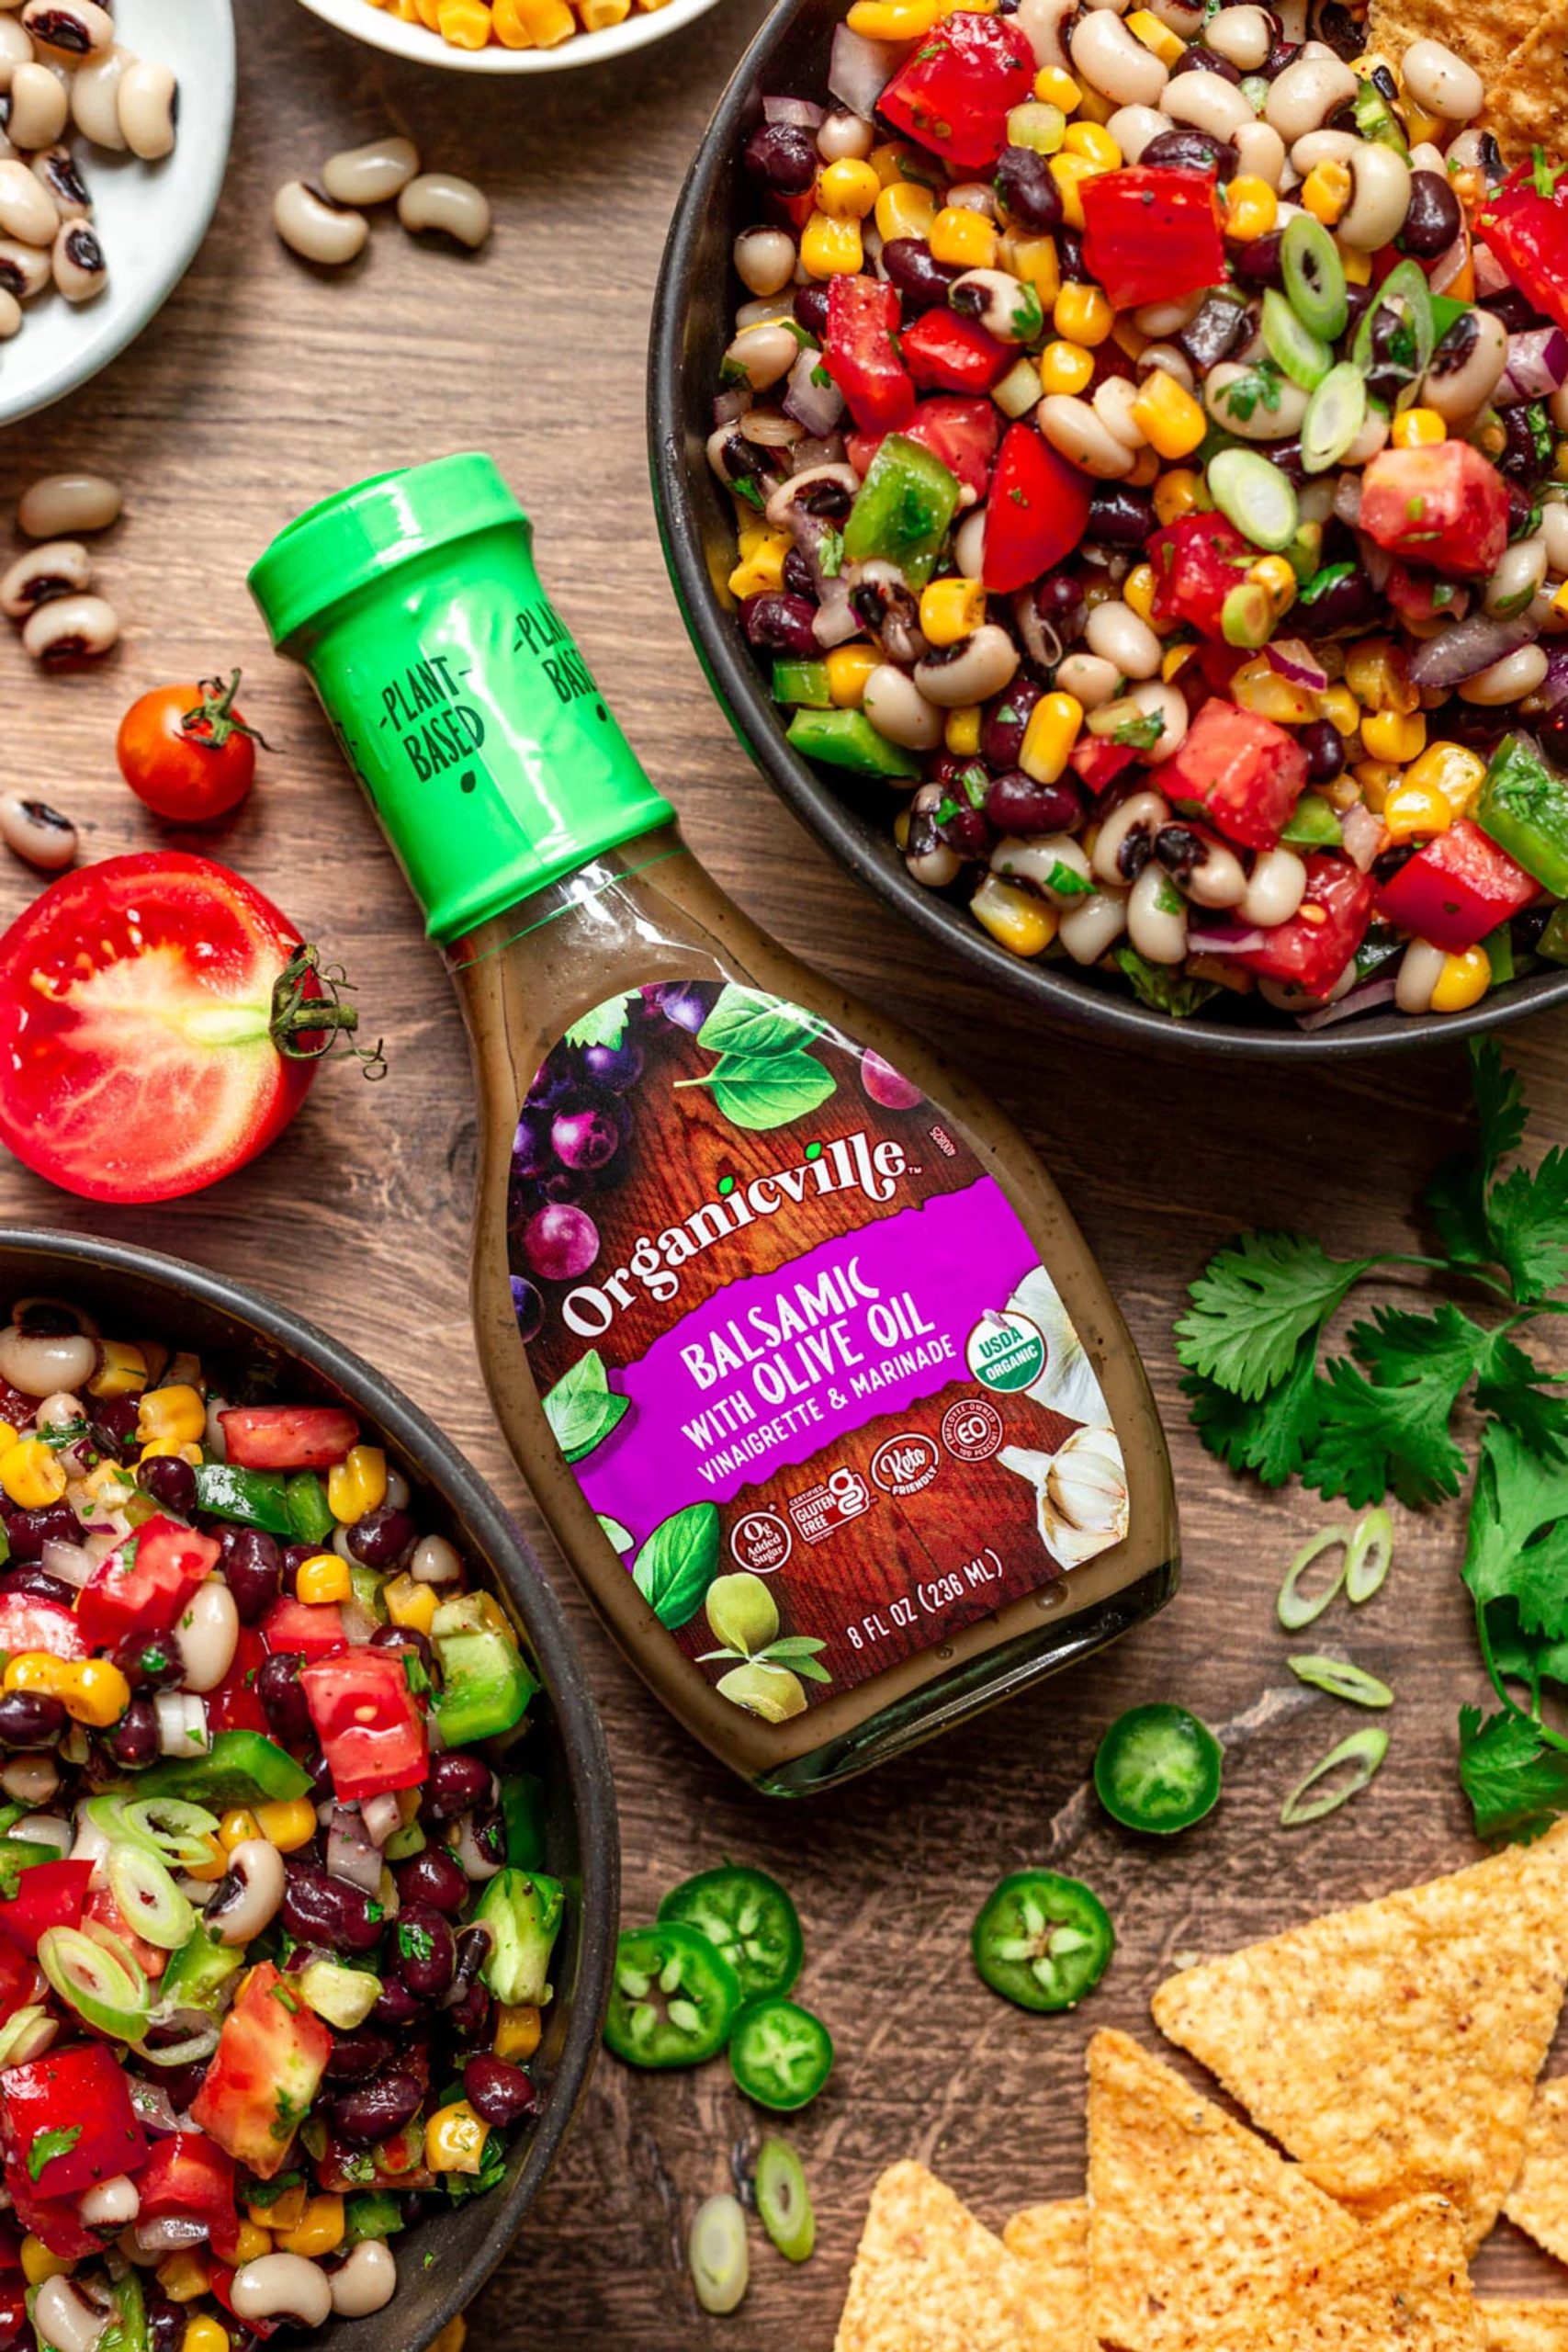 Organicville dressing with cowboy caviar in bowls